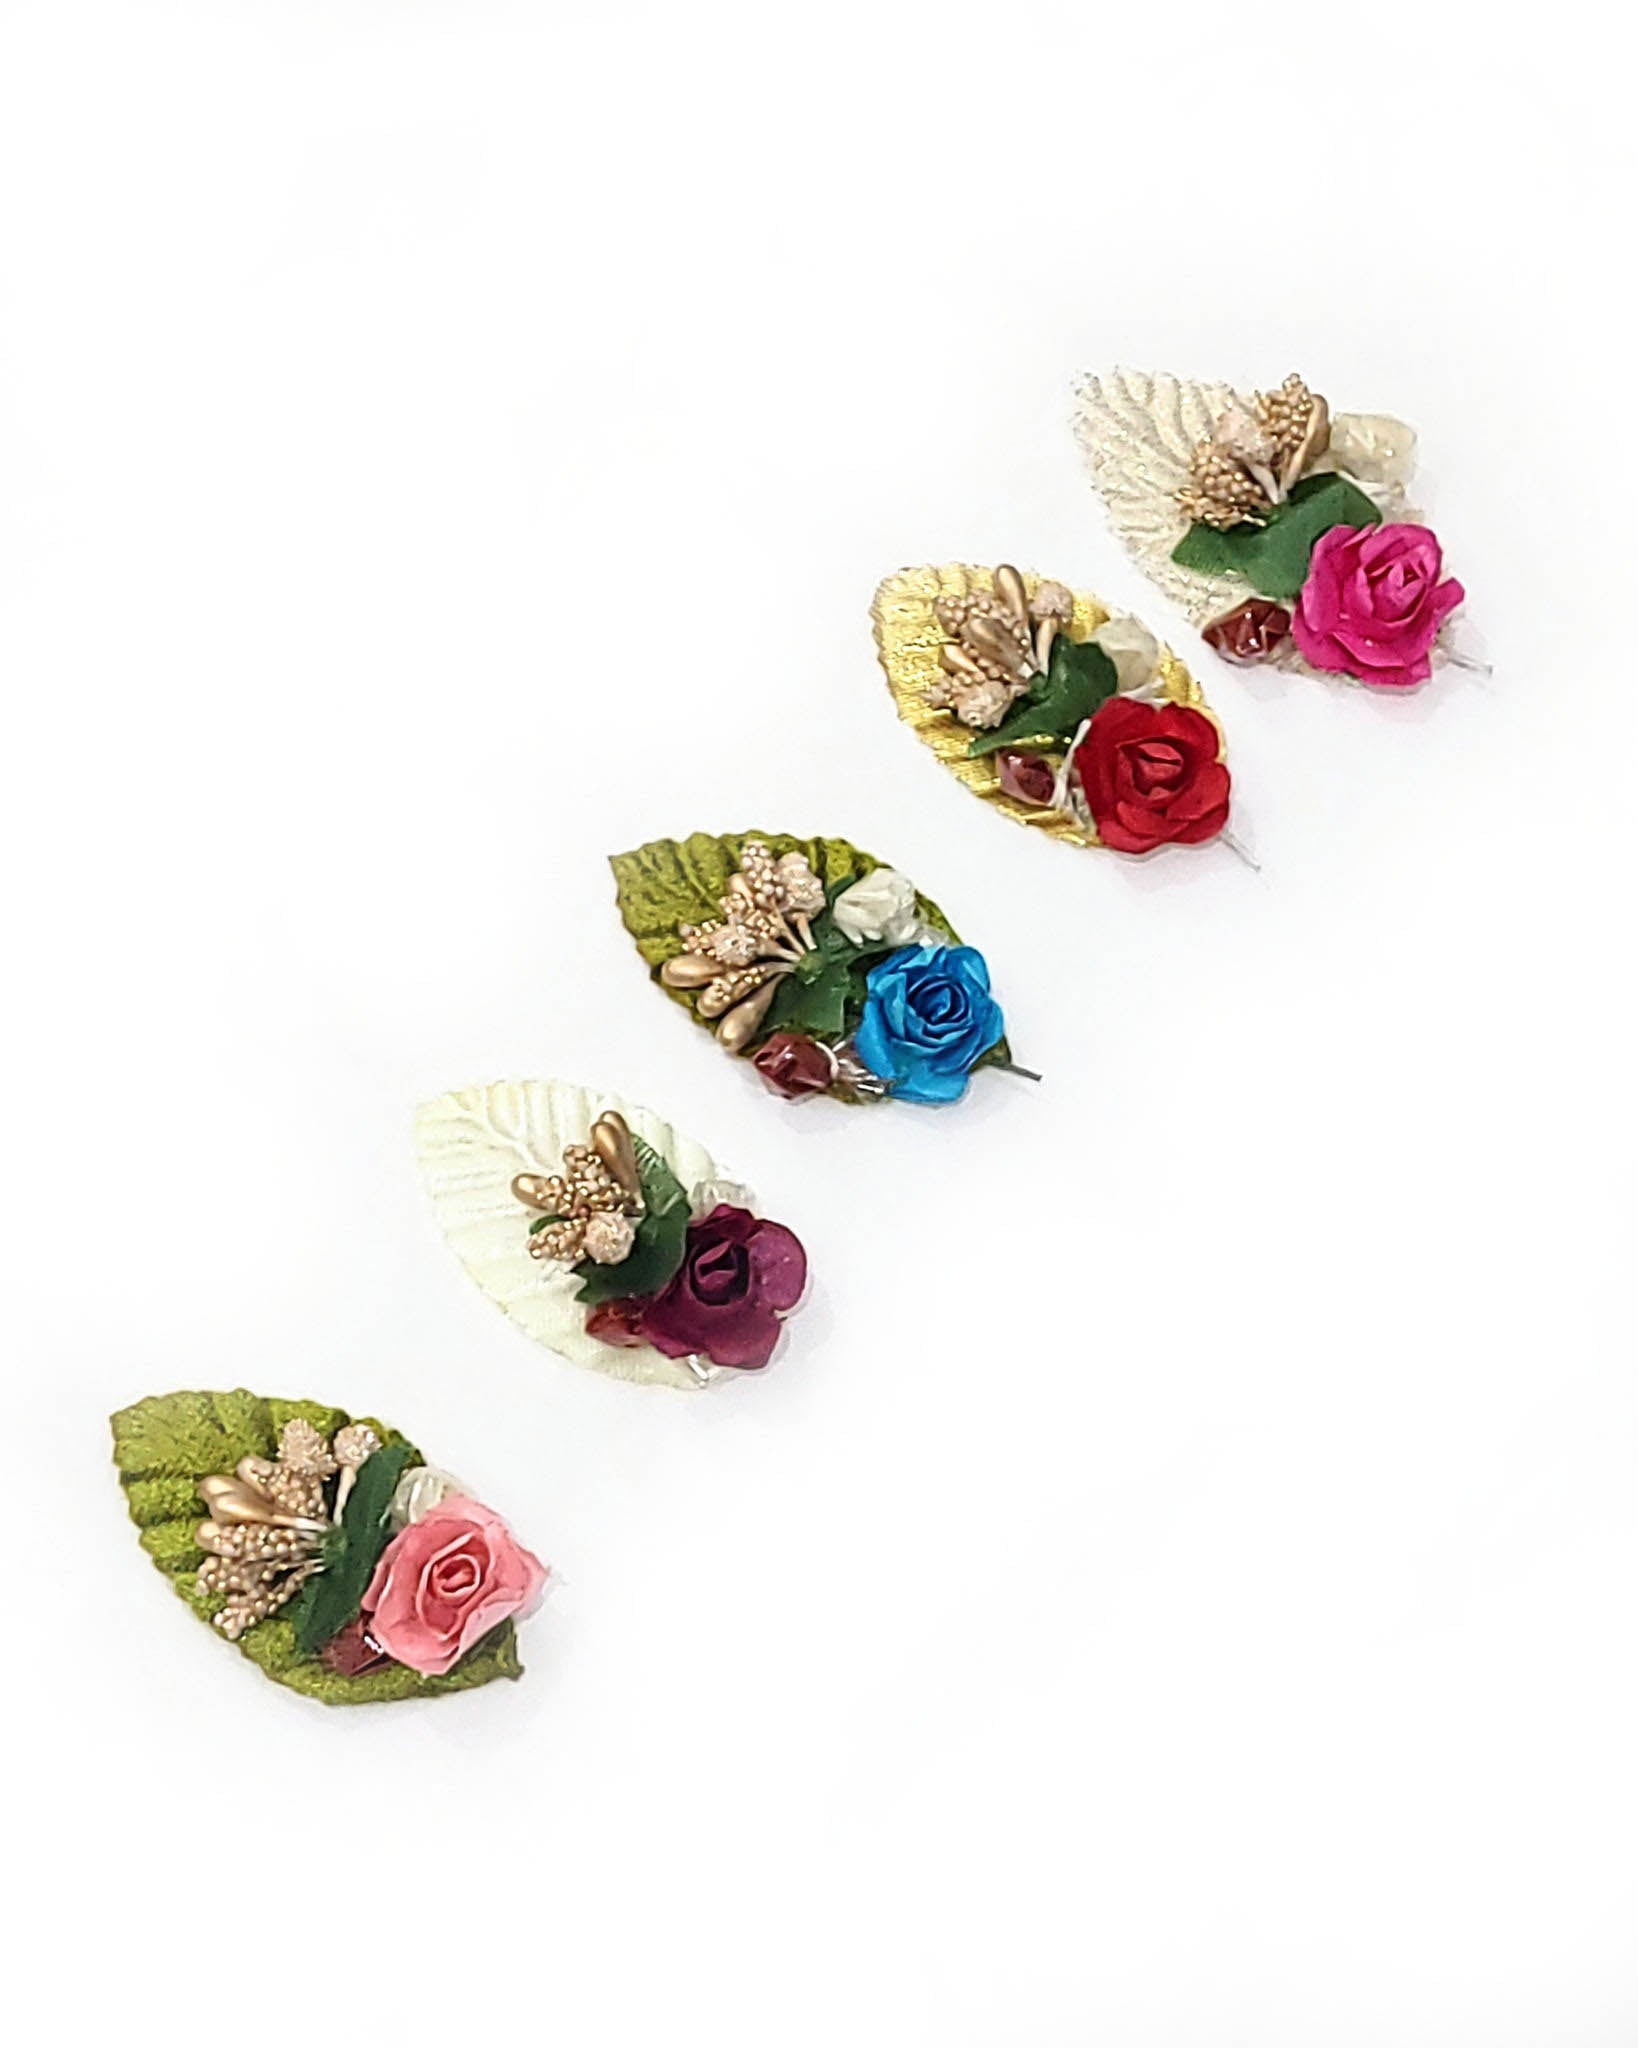 Indian Petals - Beautiful Handcrafted Premium Leaf Style Floral Mini Roli Chawal